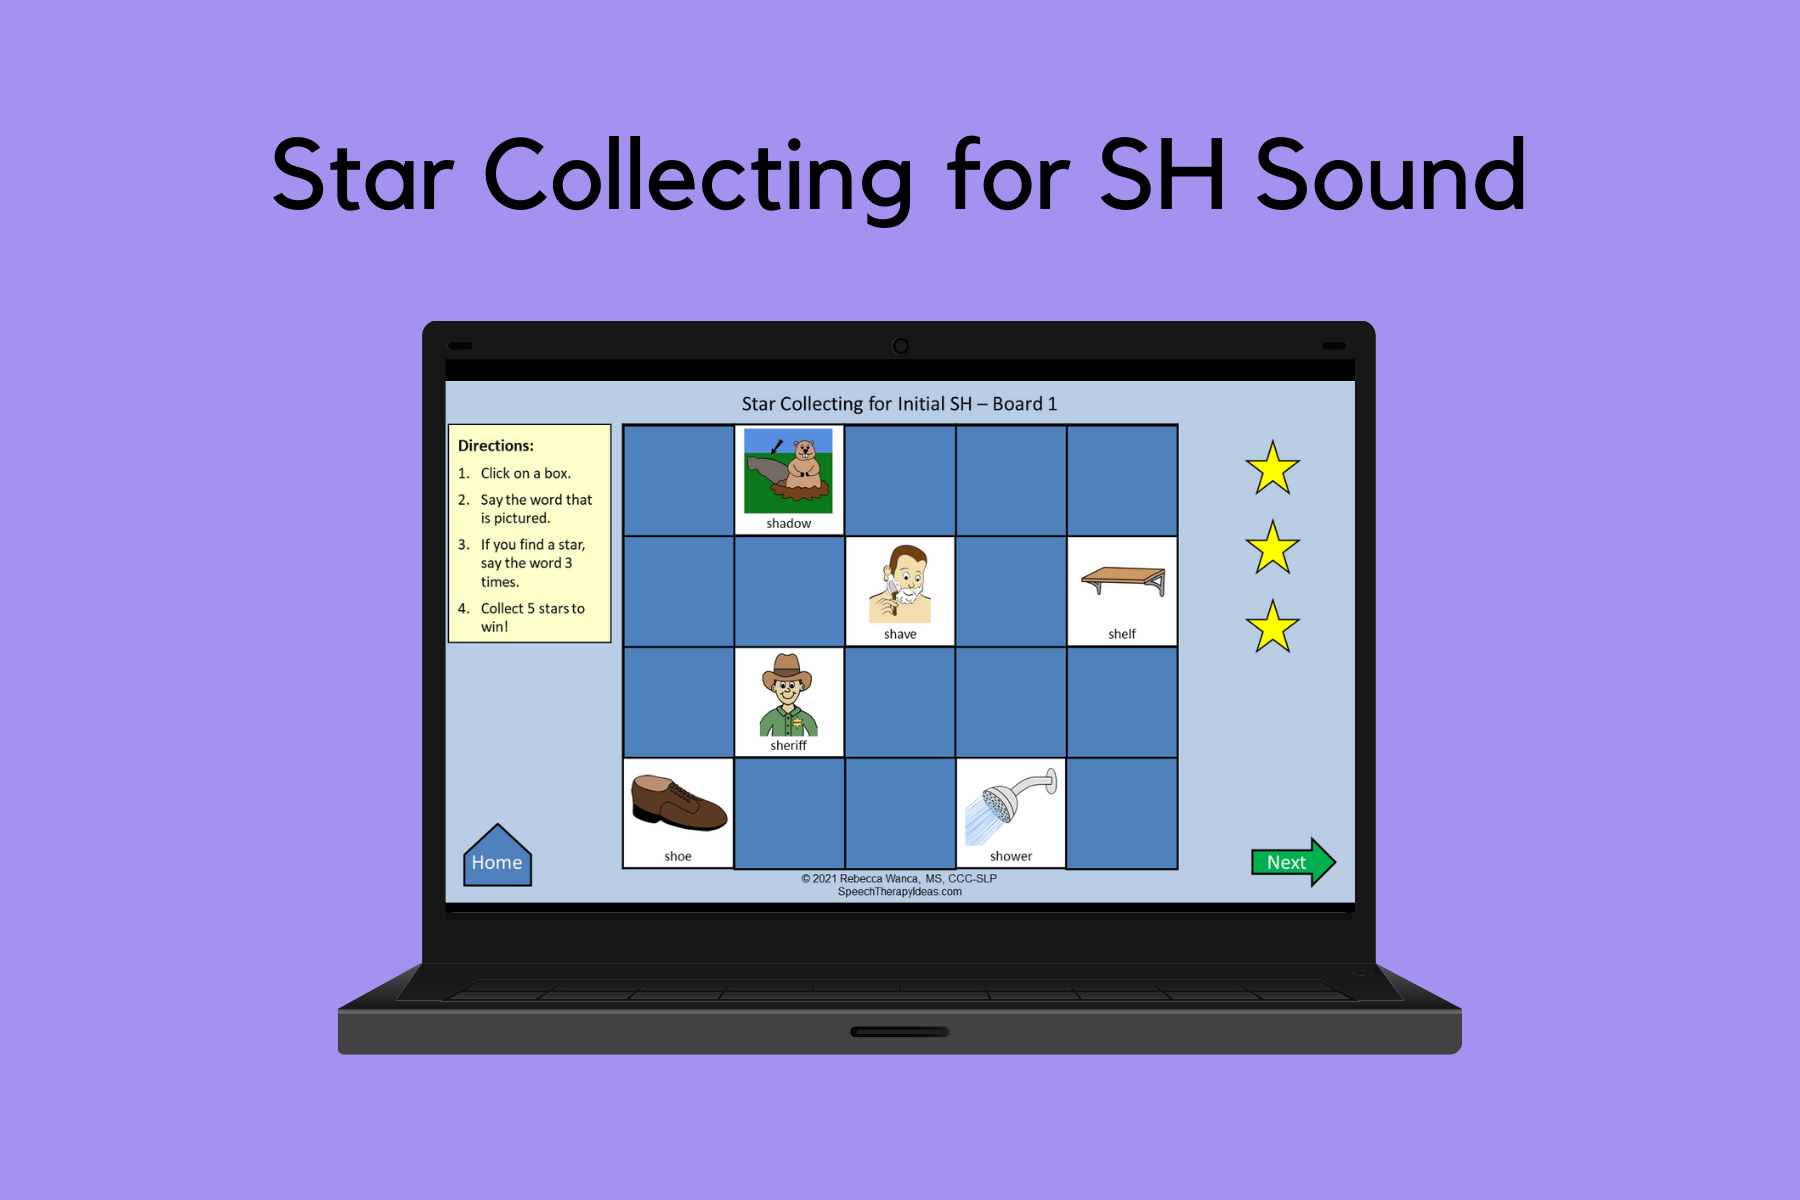 Star Collecting for SH Sound